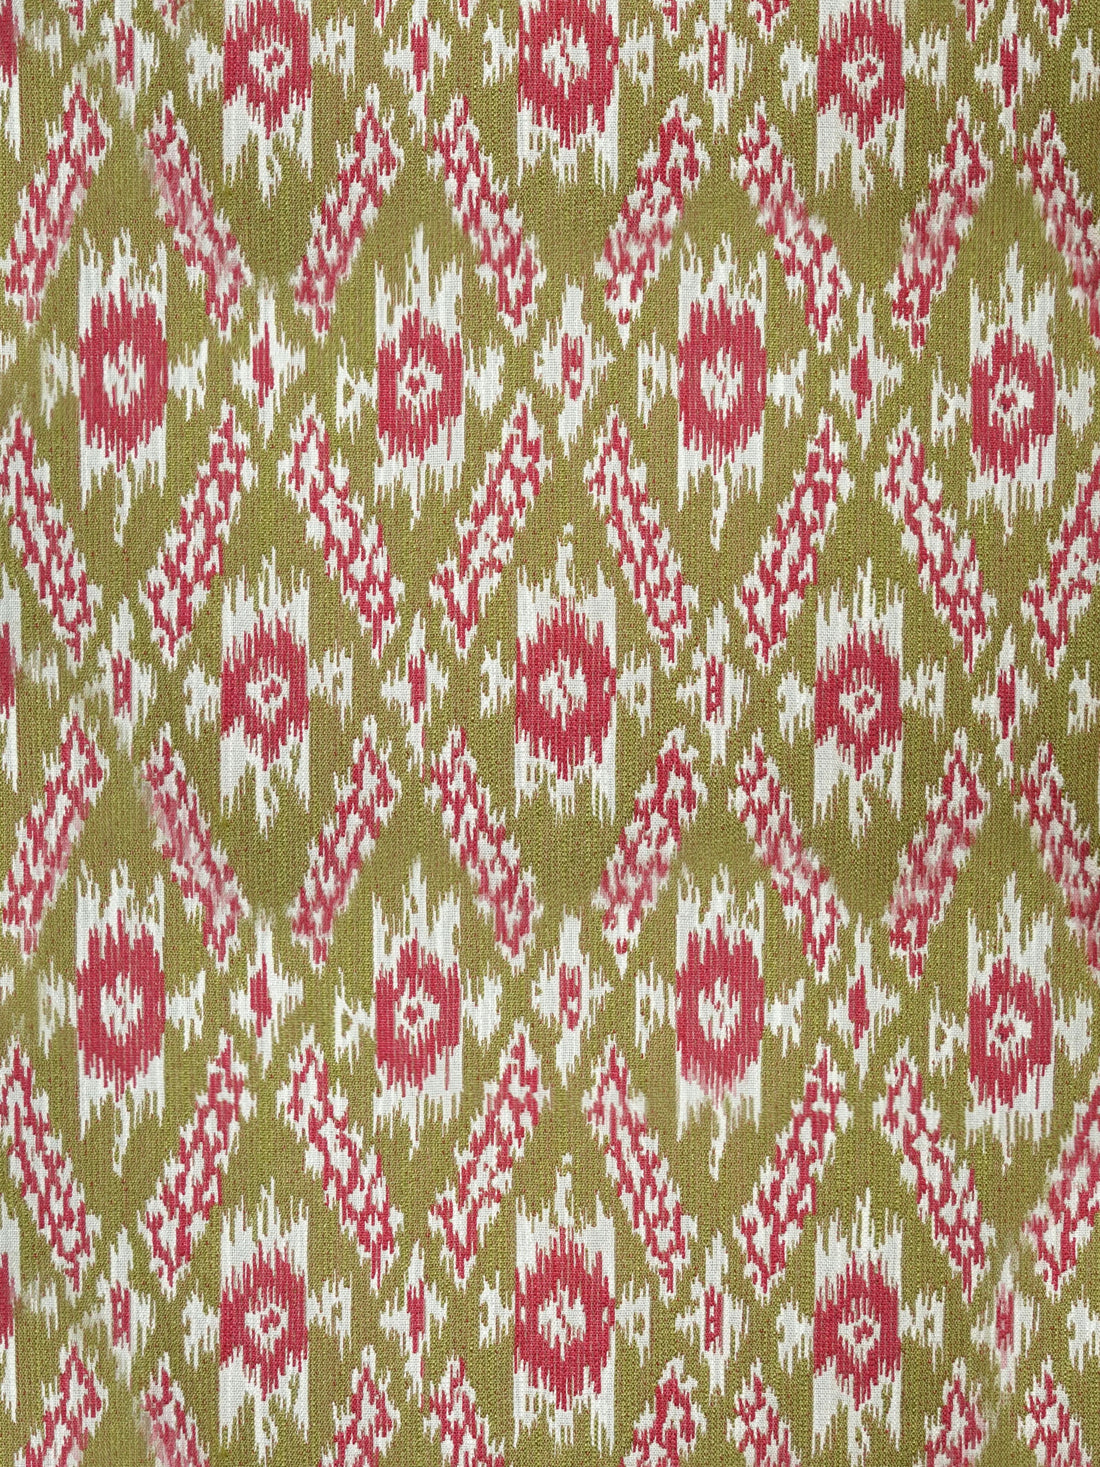 Atlas fabric in pink and green color - pattern number SC 000126980 - by Scalamandre in the Scalamandre Fabrics Book 1 collection